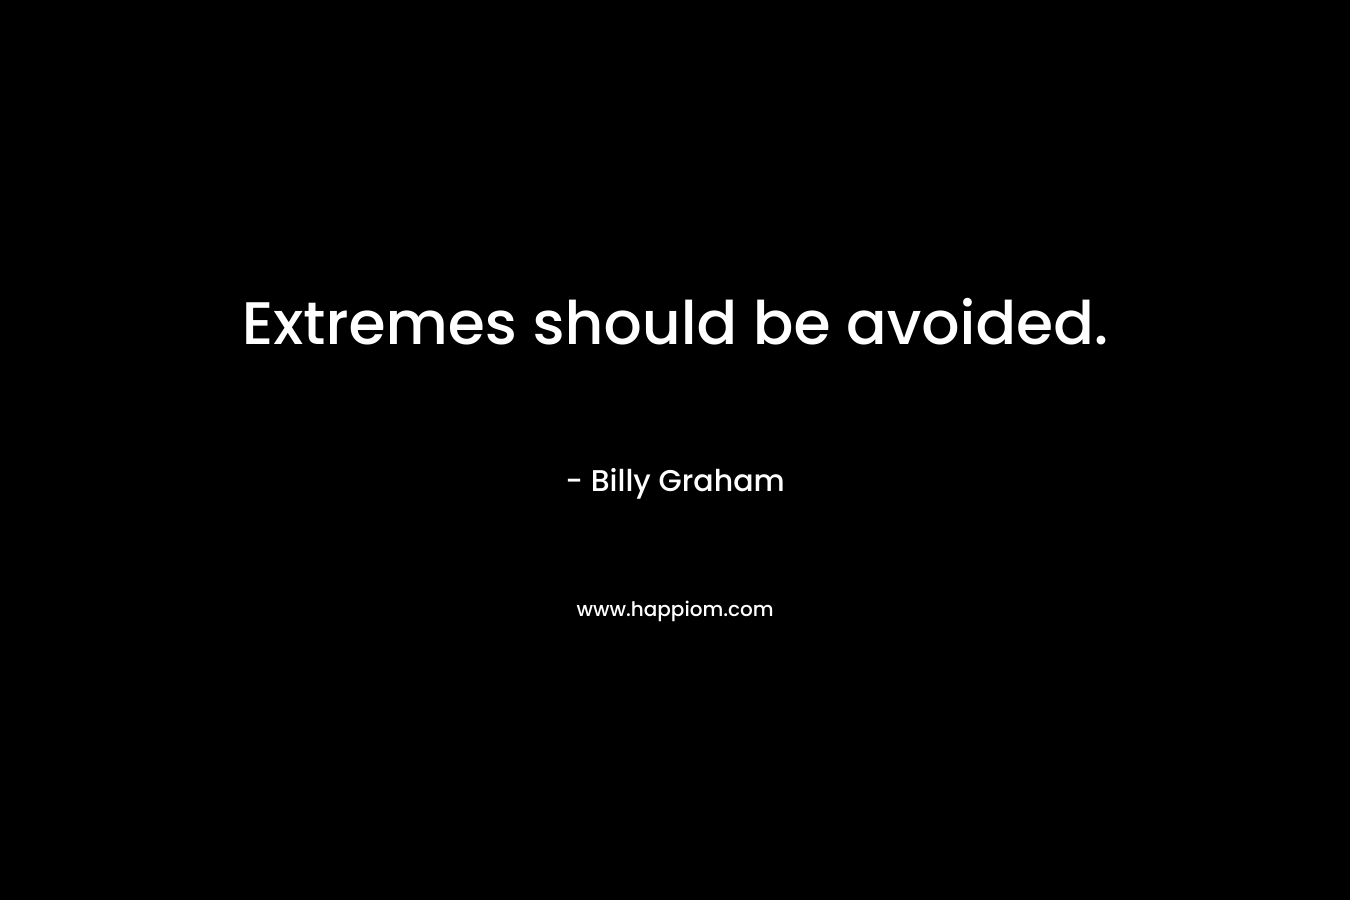 Extremes should be avoided. – Billy Graham